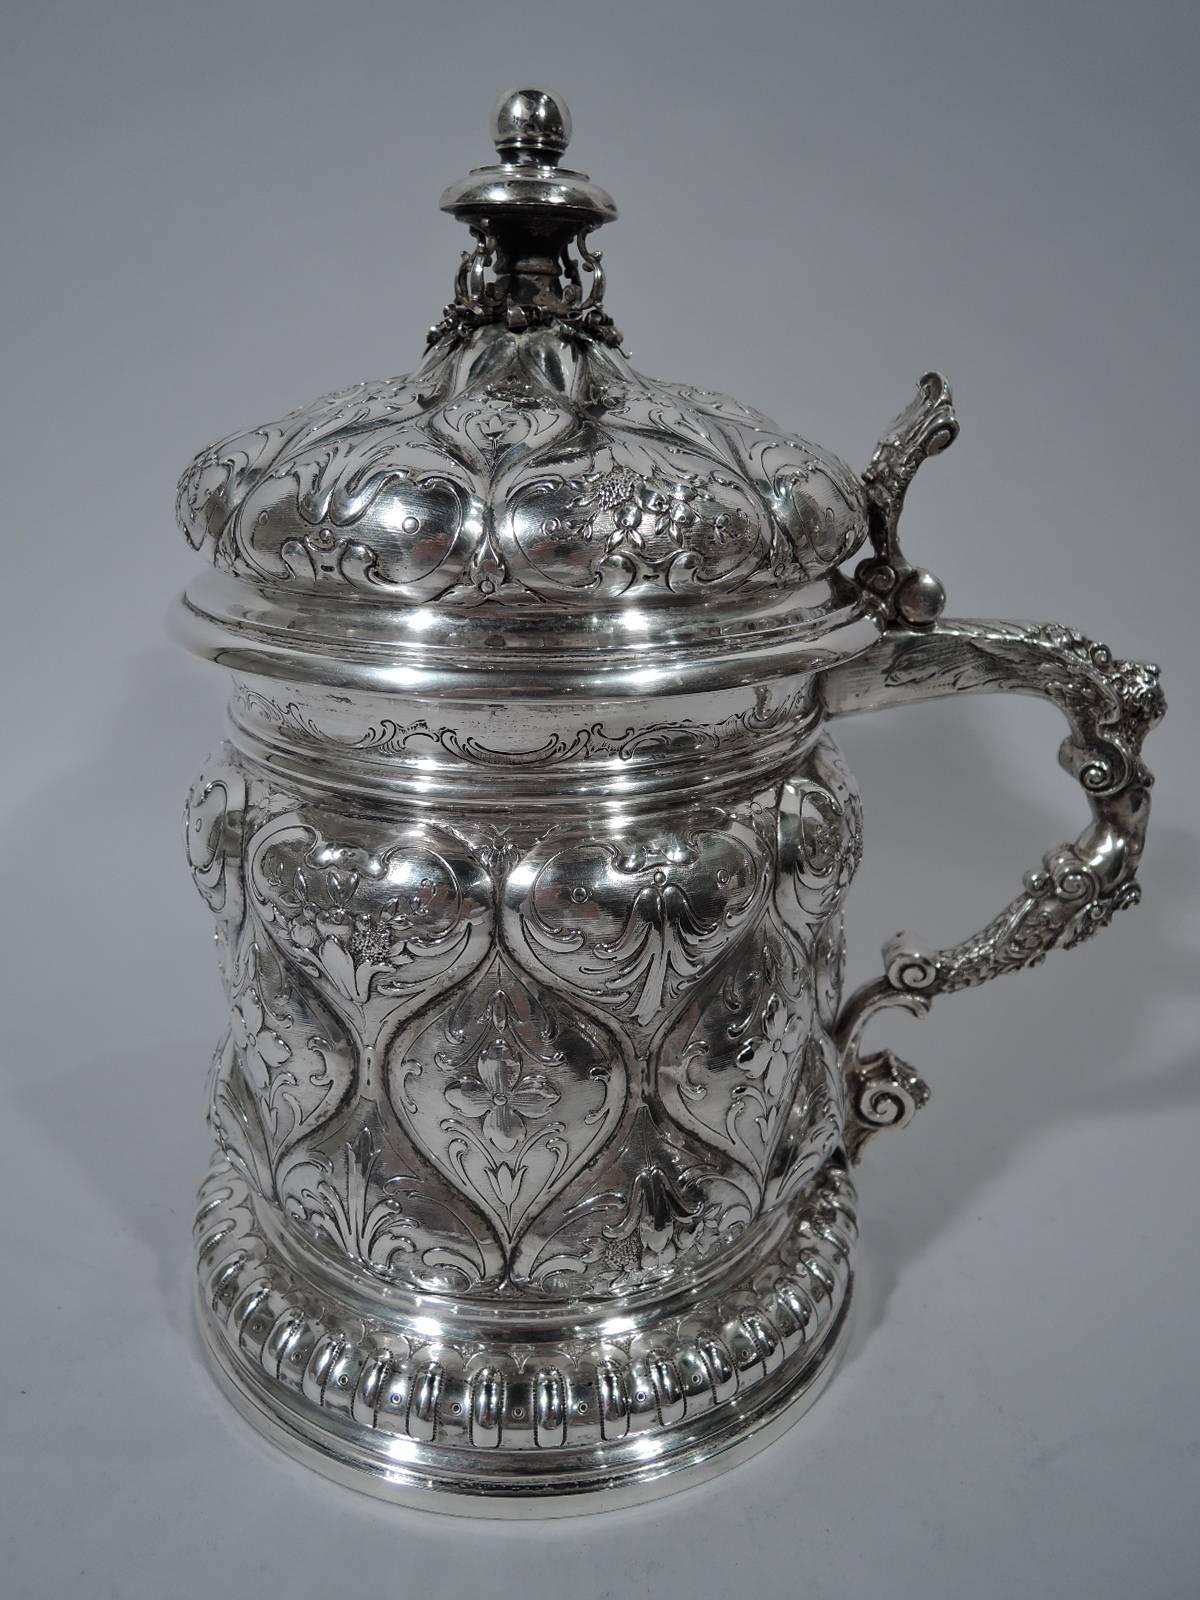 Antique German 800 silver tankard in 18th century style. Drum-form bowl with raised foot, hinged and domed cover, and s-scroll finial. Floral-decorated quilting, hinged bun cover with mask thumb rest and ornamental finial, and double-scroll handle